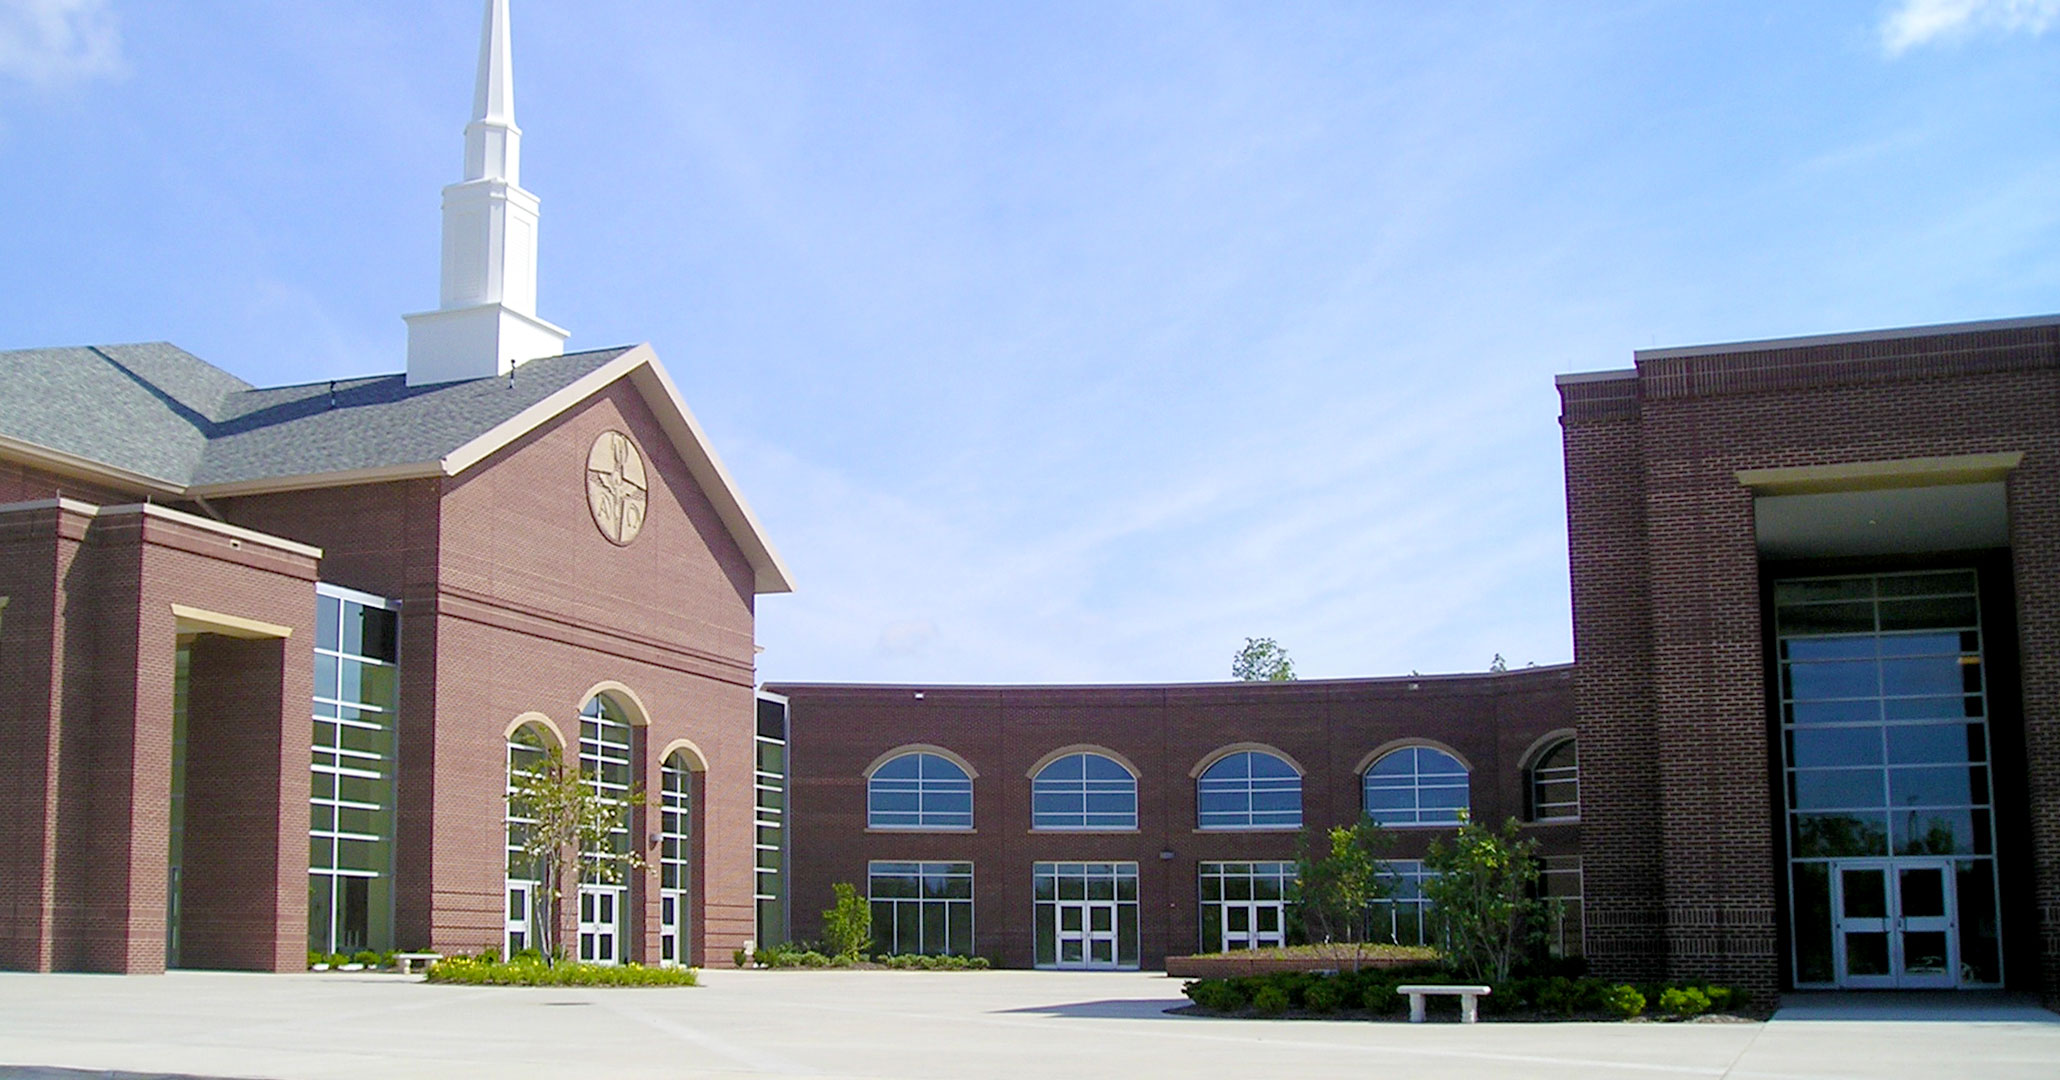 Boudreaux architects worked with the Riverland Hills Church to design an expansion to their existing footprint.